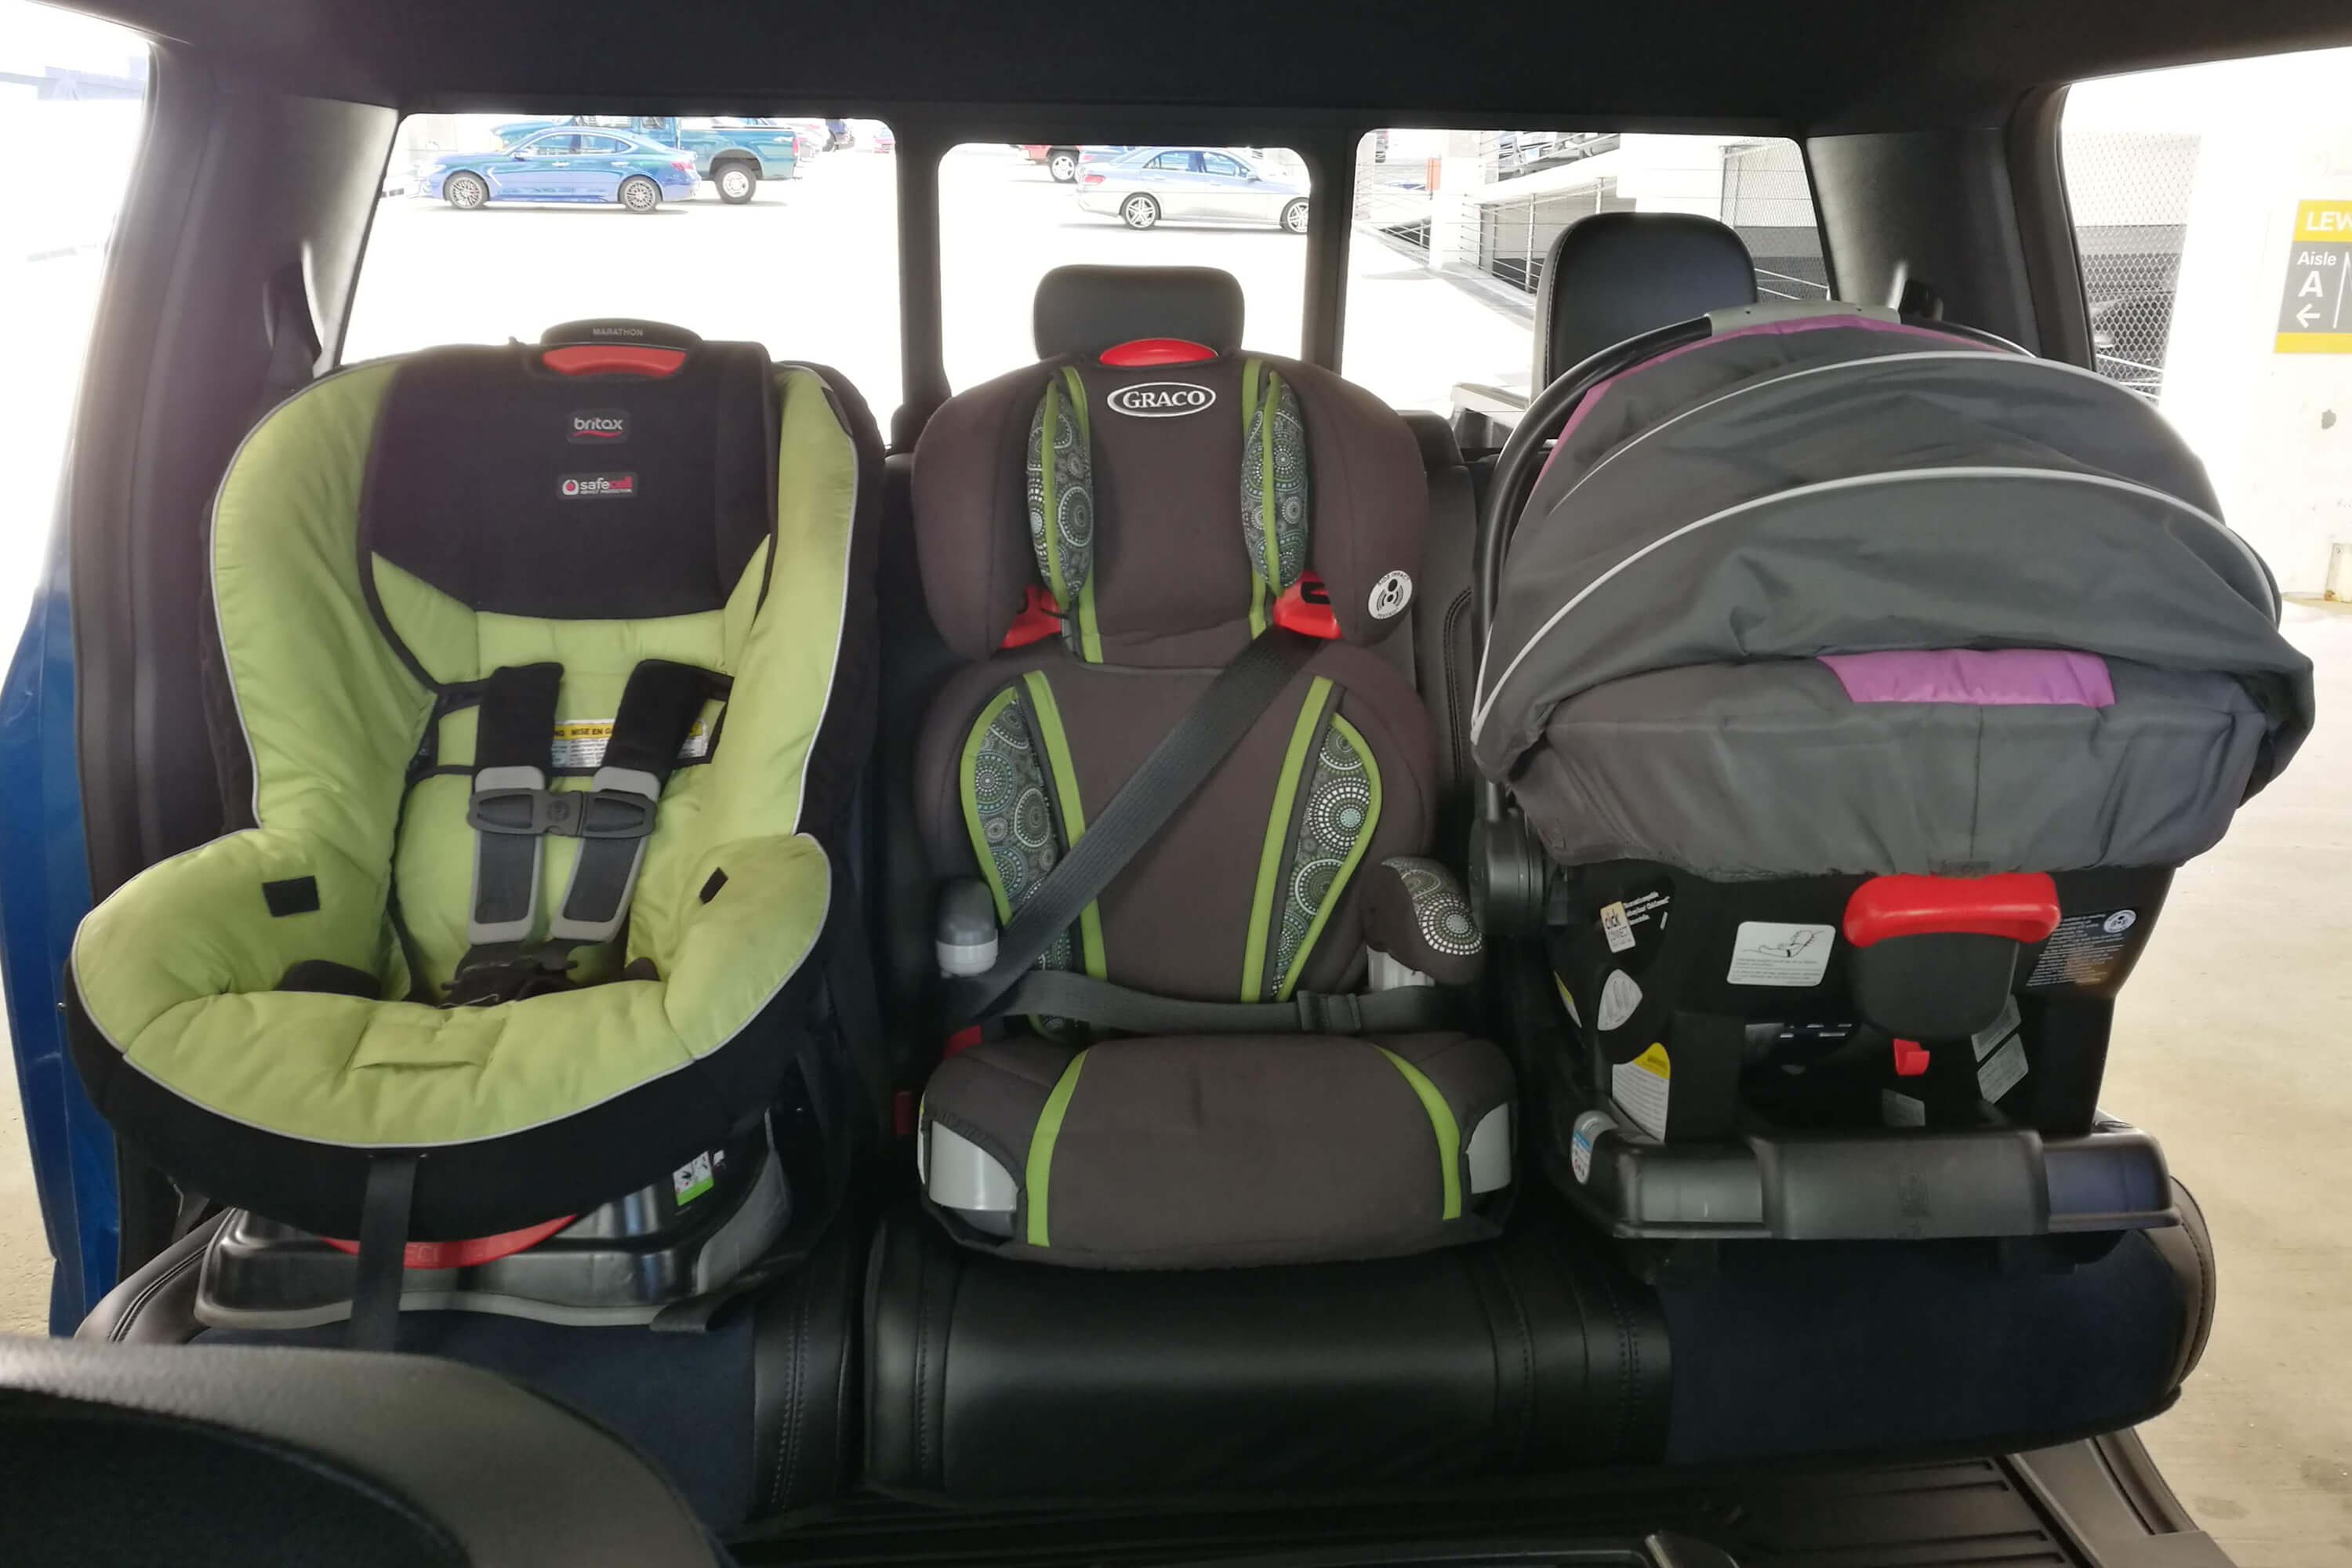 How To Fit Car Seats 3 Across In A Row 